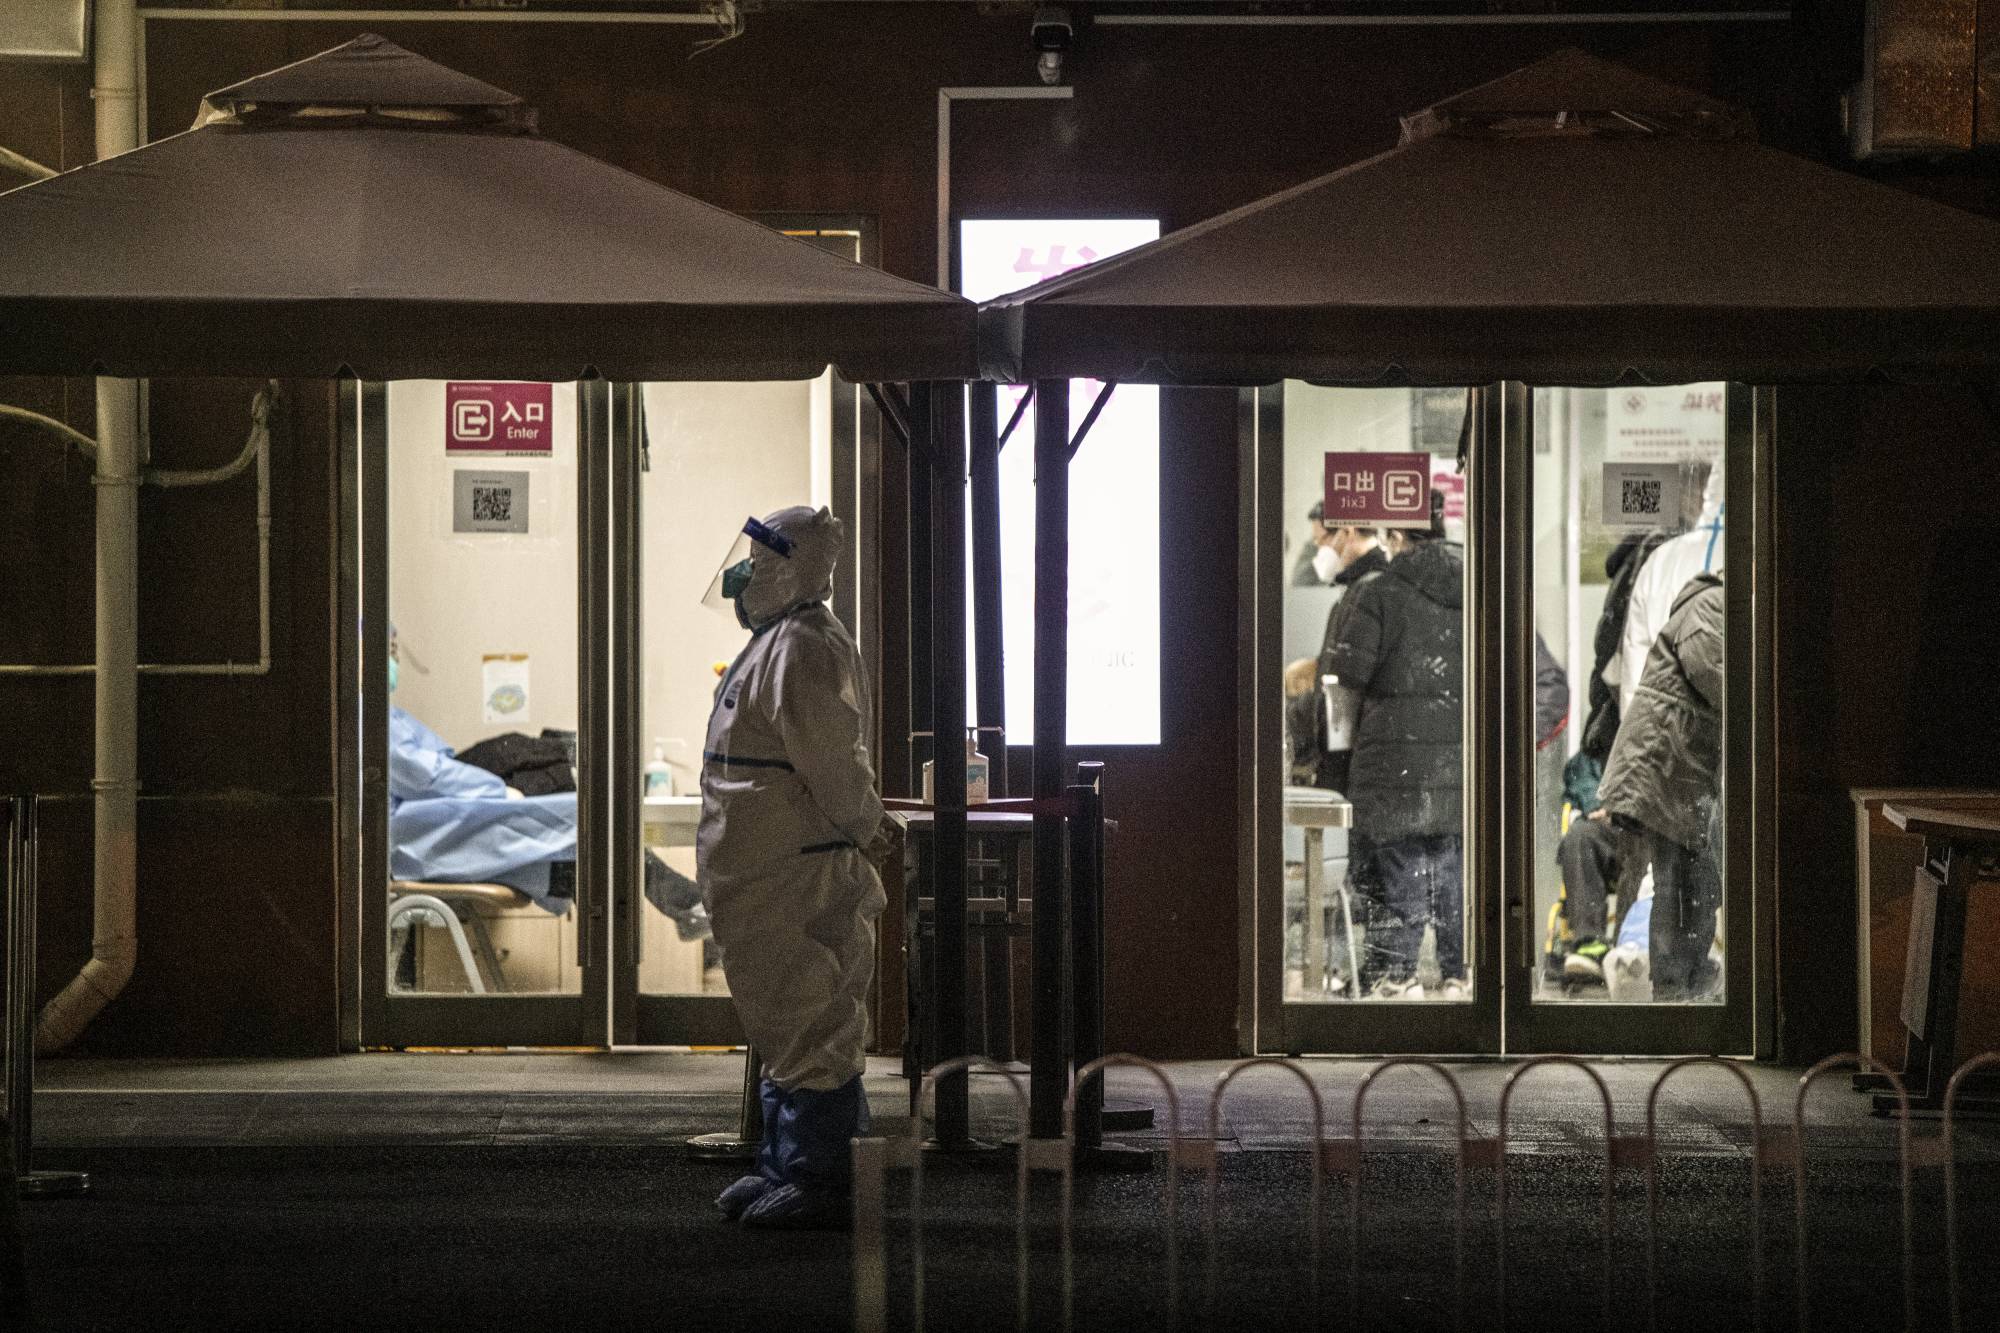 The entrance to a busy fever clinic in Beijing on Dec. 20.  | GILLES SABRIE / THE NEW YORK TIMES